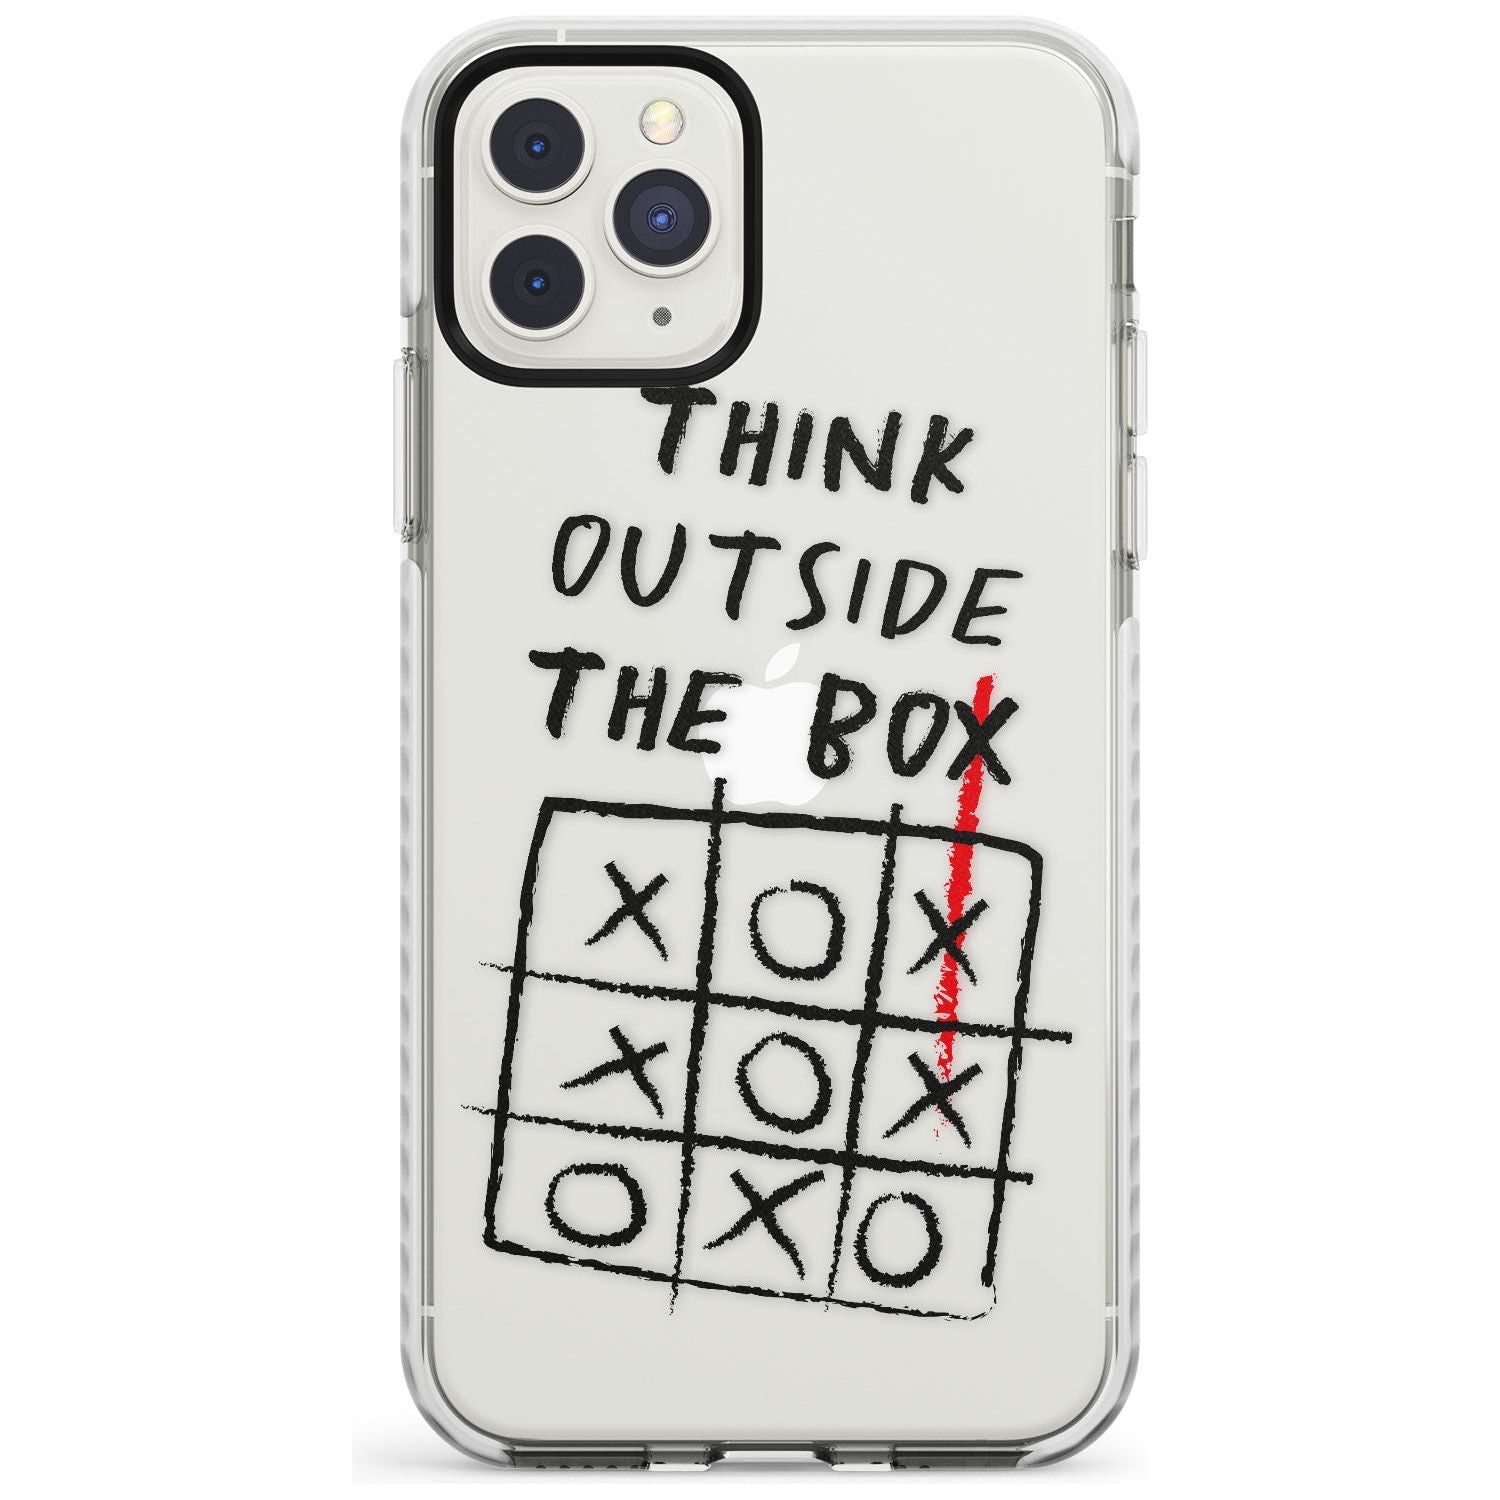 "Think Outside the Box" Impact Phone Case for iPhone 11 Pro Max